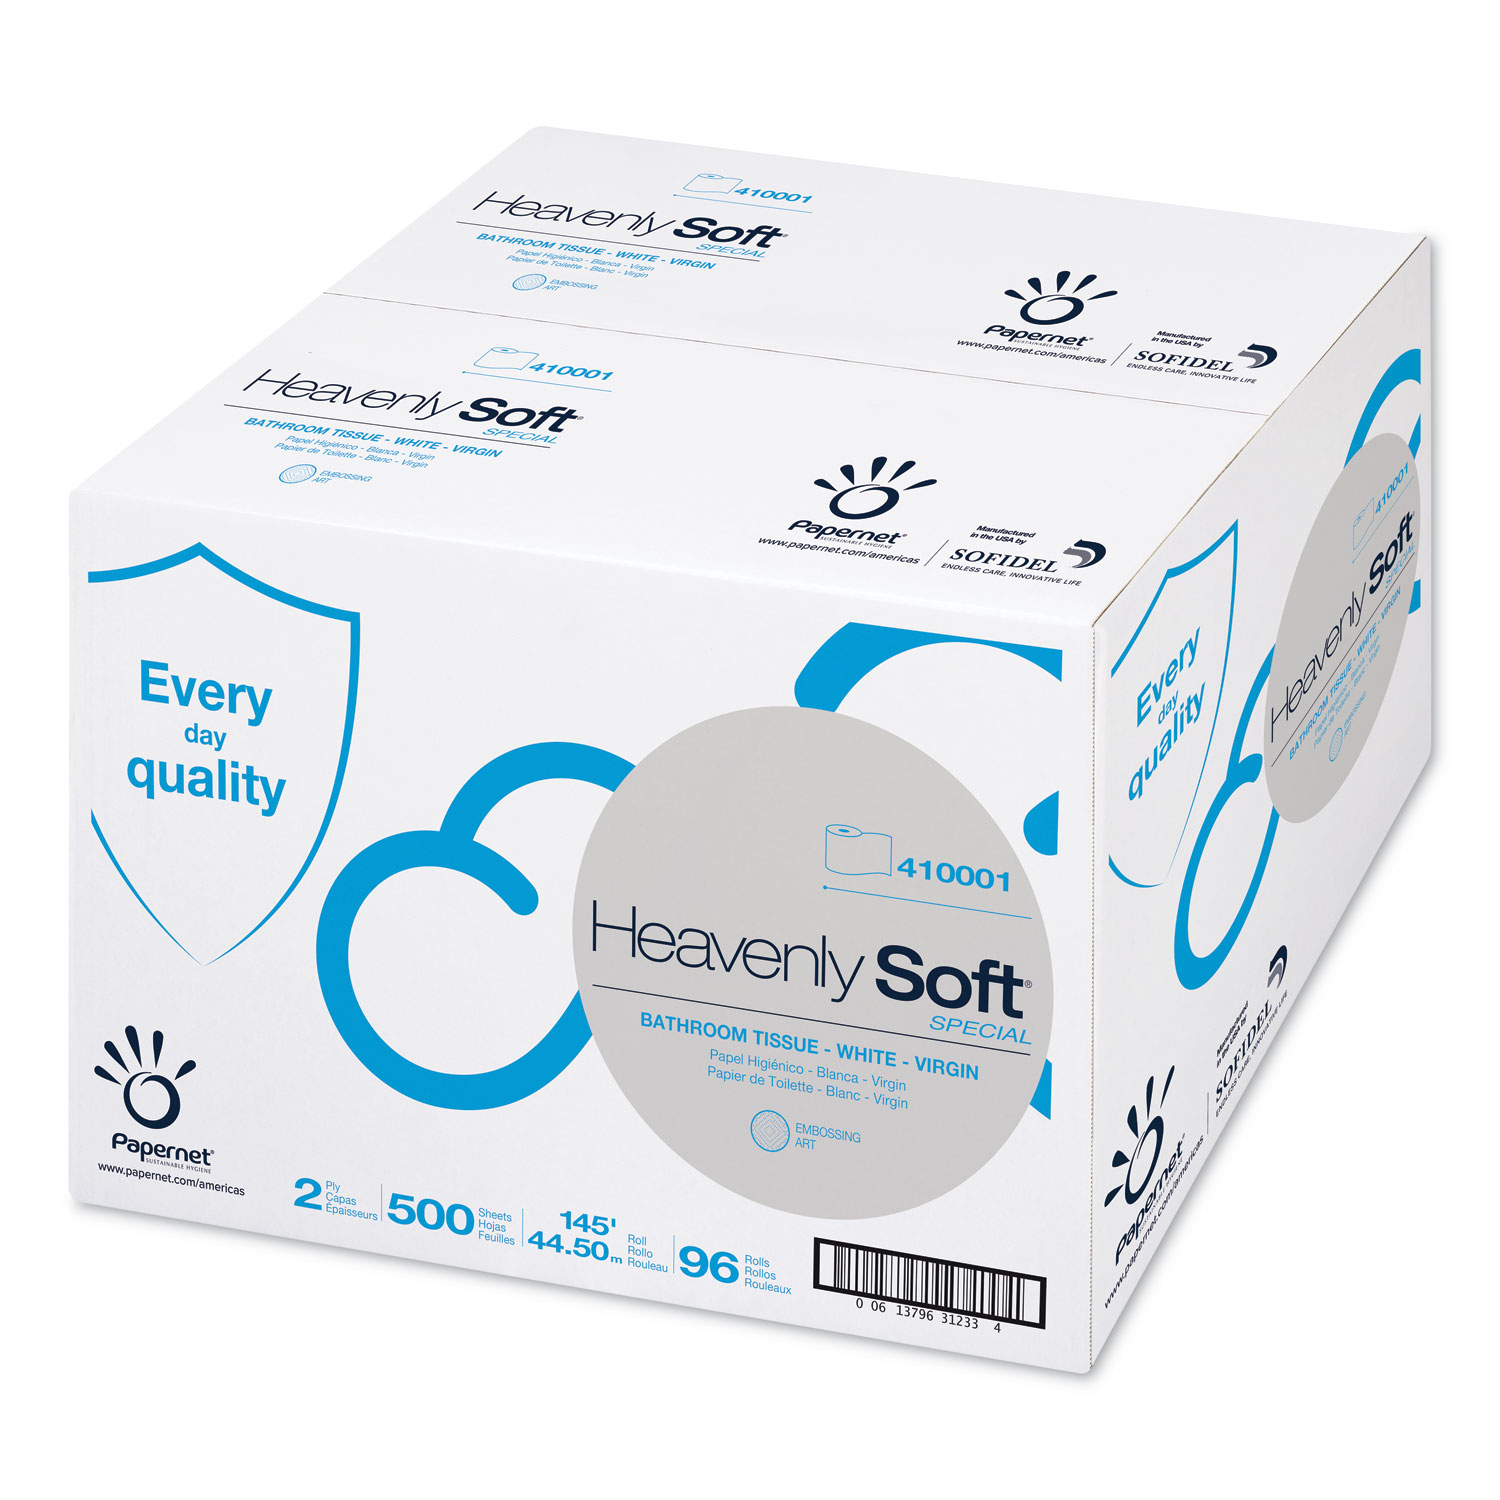  Papernet 410001 Heavenly Soft Toilet Tissue, Septic Safe, 2-Ply, White. 4.1 x 146 ft, 500 Sheets/Roll, 96 Rolls/Carton (SOD410001) 